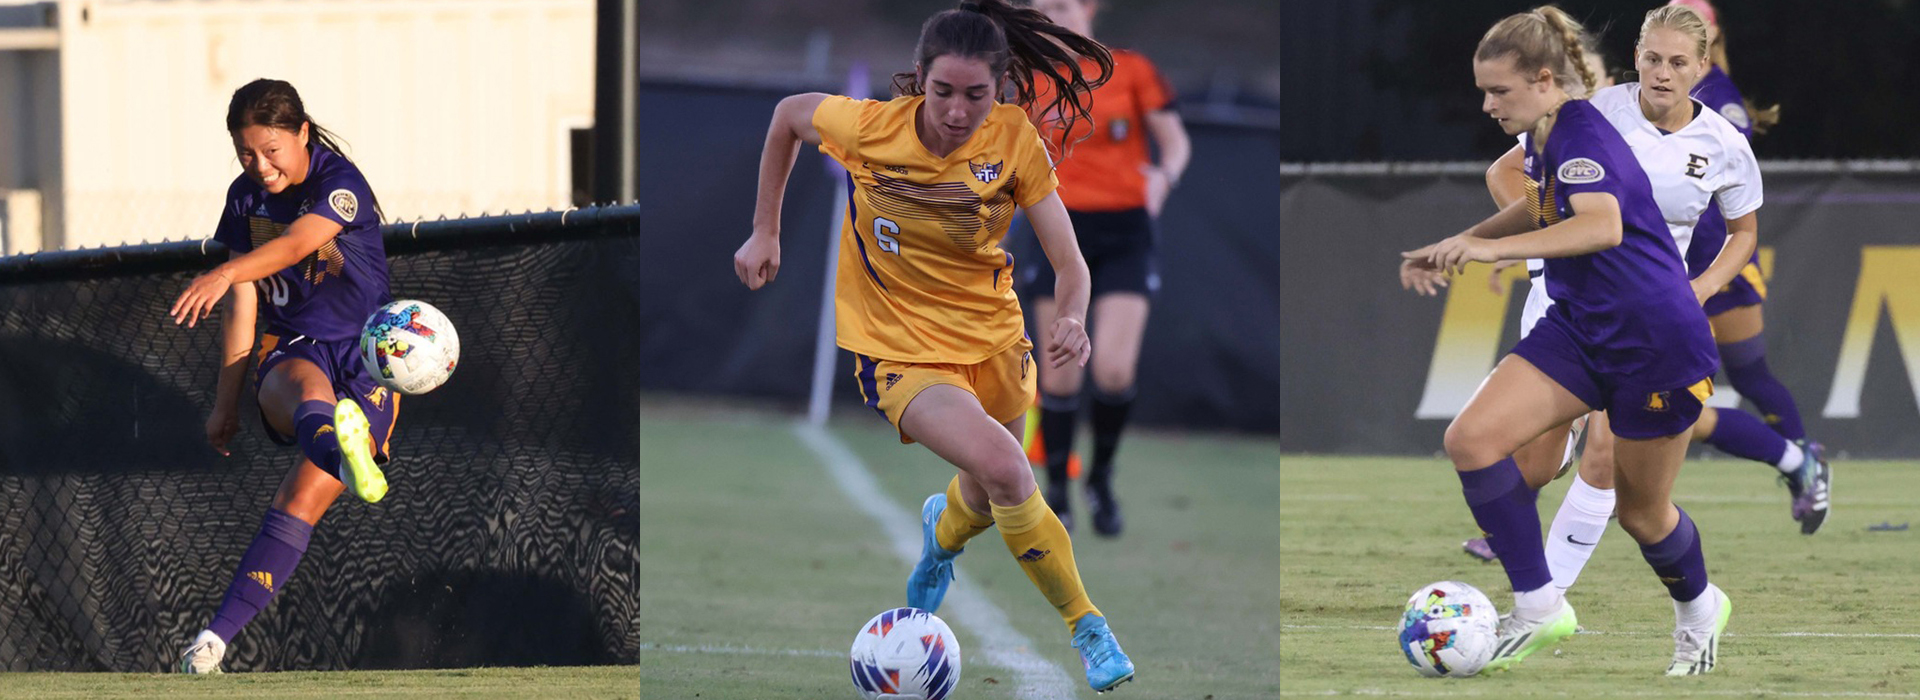 Giada Zhou, Toney and Renwick named to United Soccer Coaches All-South Region teams